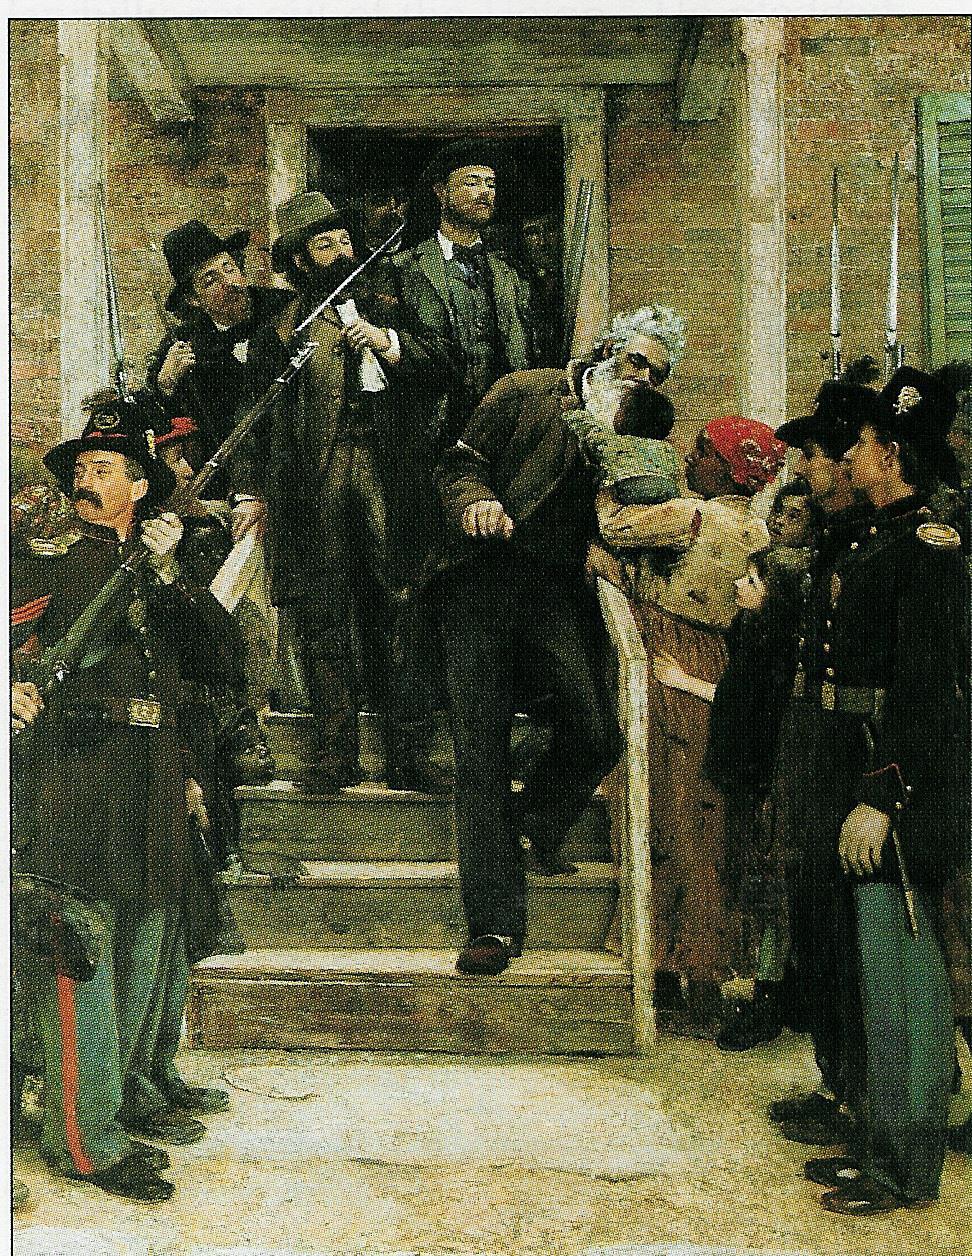 A drawing of John Brown on his way to be executed.